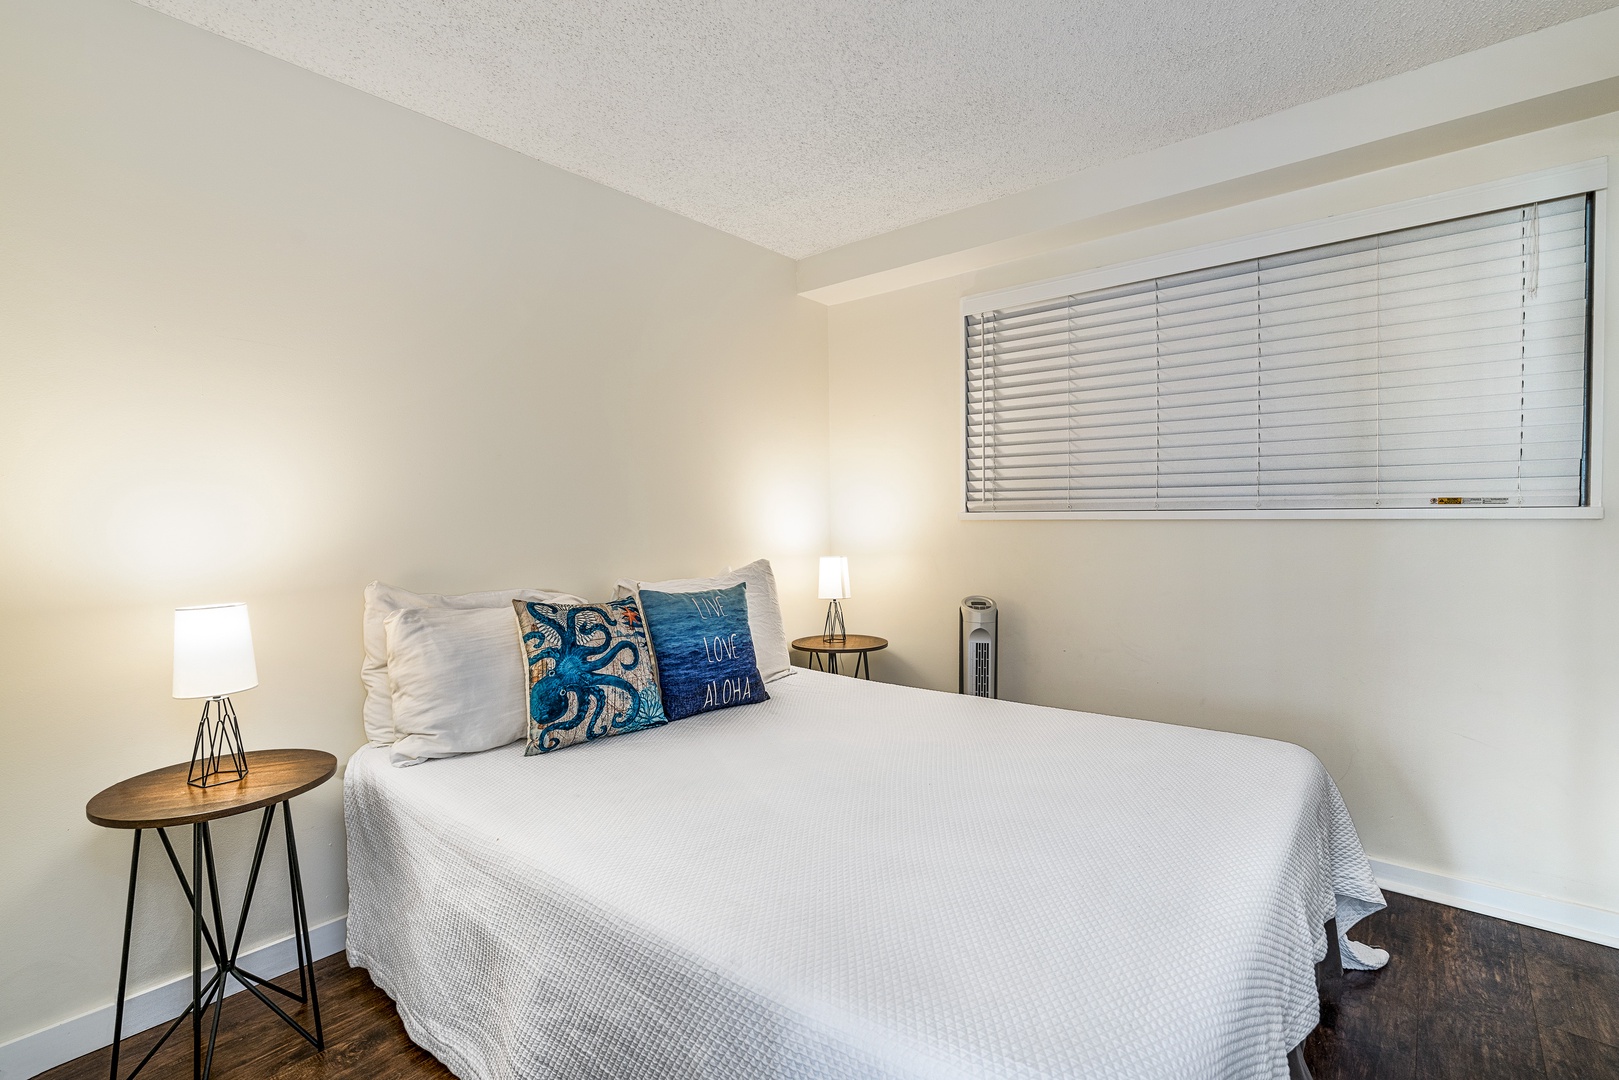 Kailua Kona Vacation Rentals, Kona Plaza 201 - Guest bathroom equipped with Queen bed and Central A/C